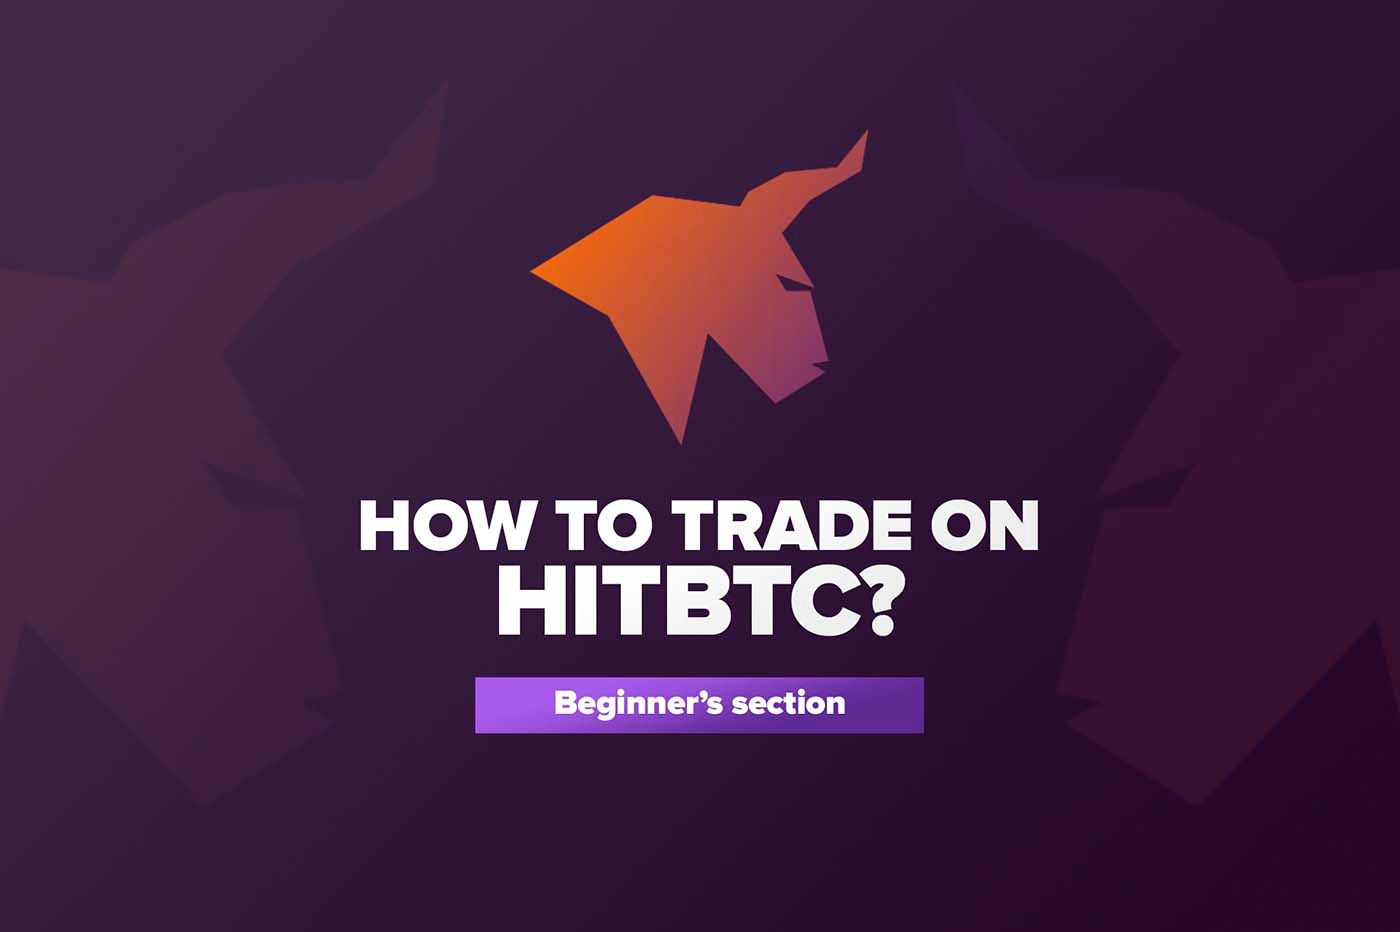 Article How to trade on HITBTC?